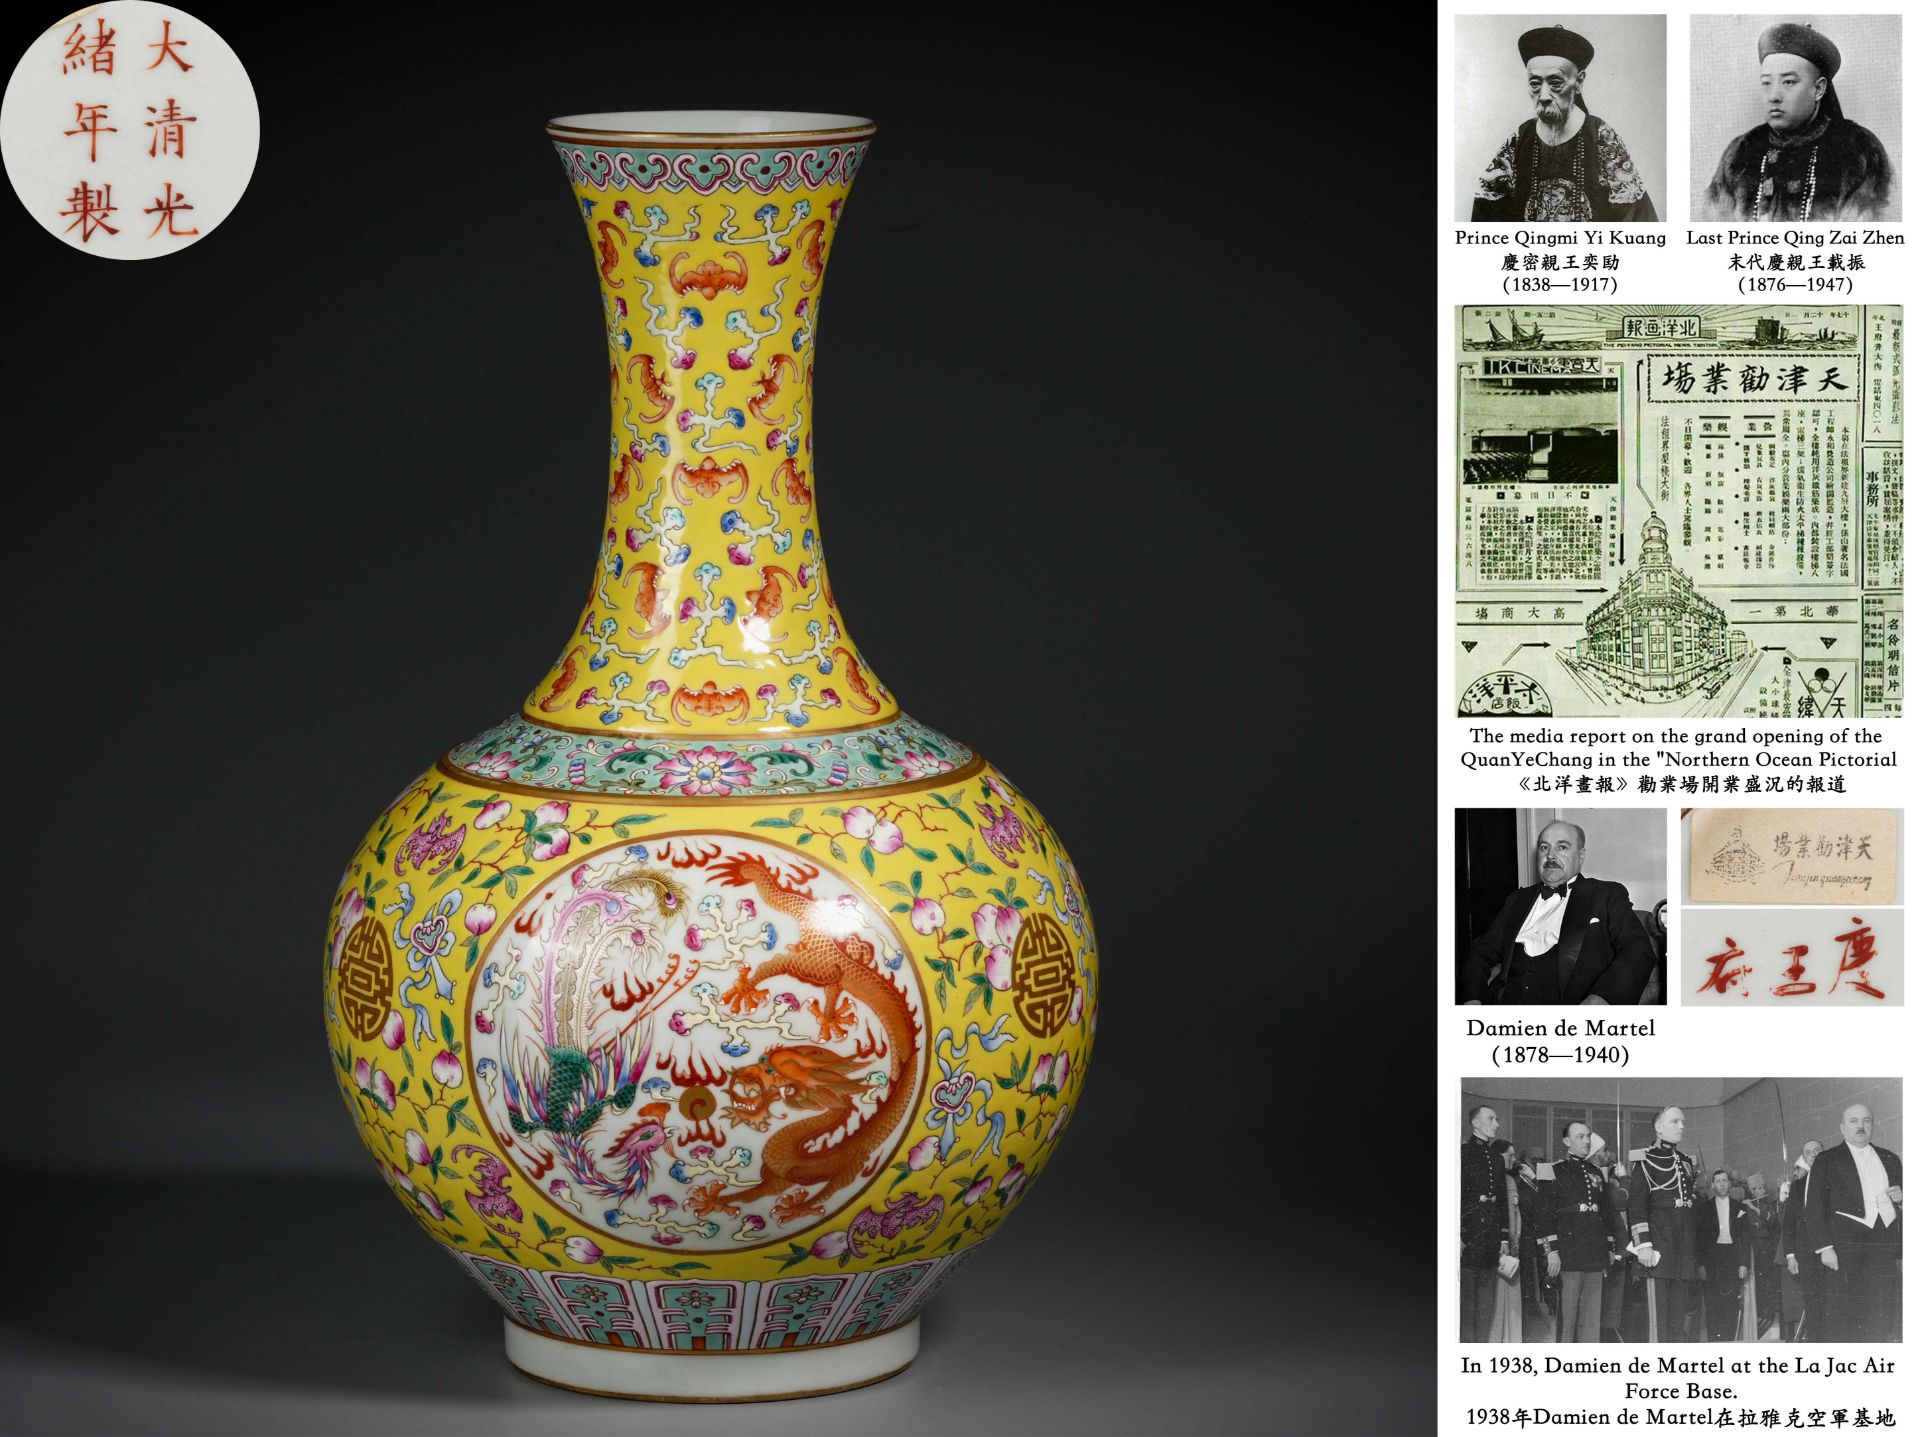 A Chinese Famille Rose and Gilt Decorative Vase